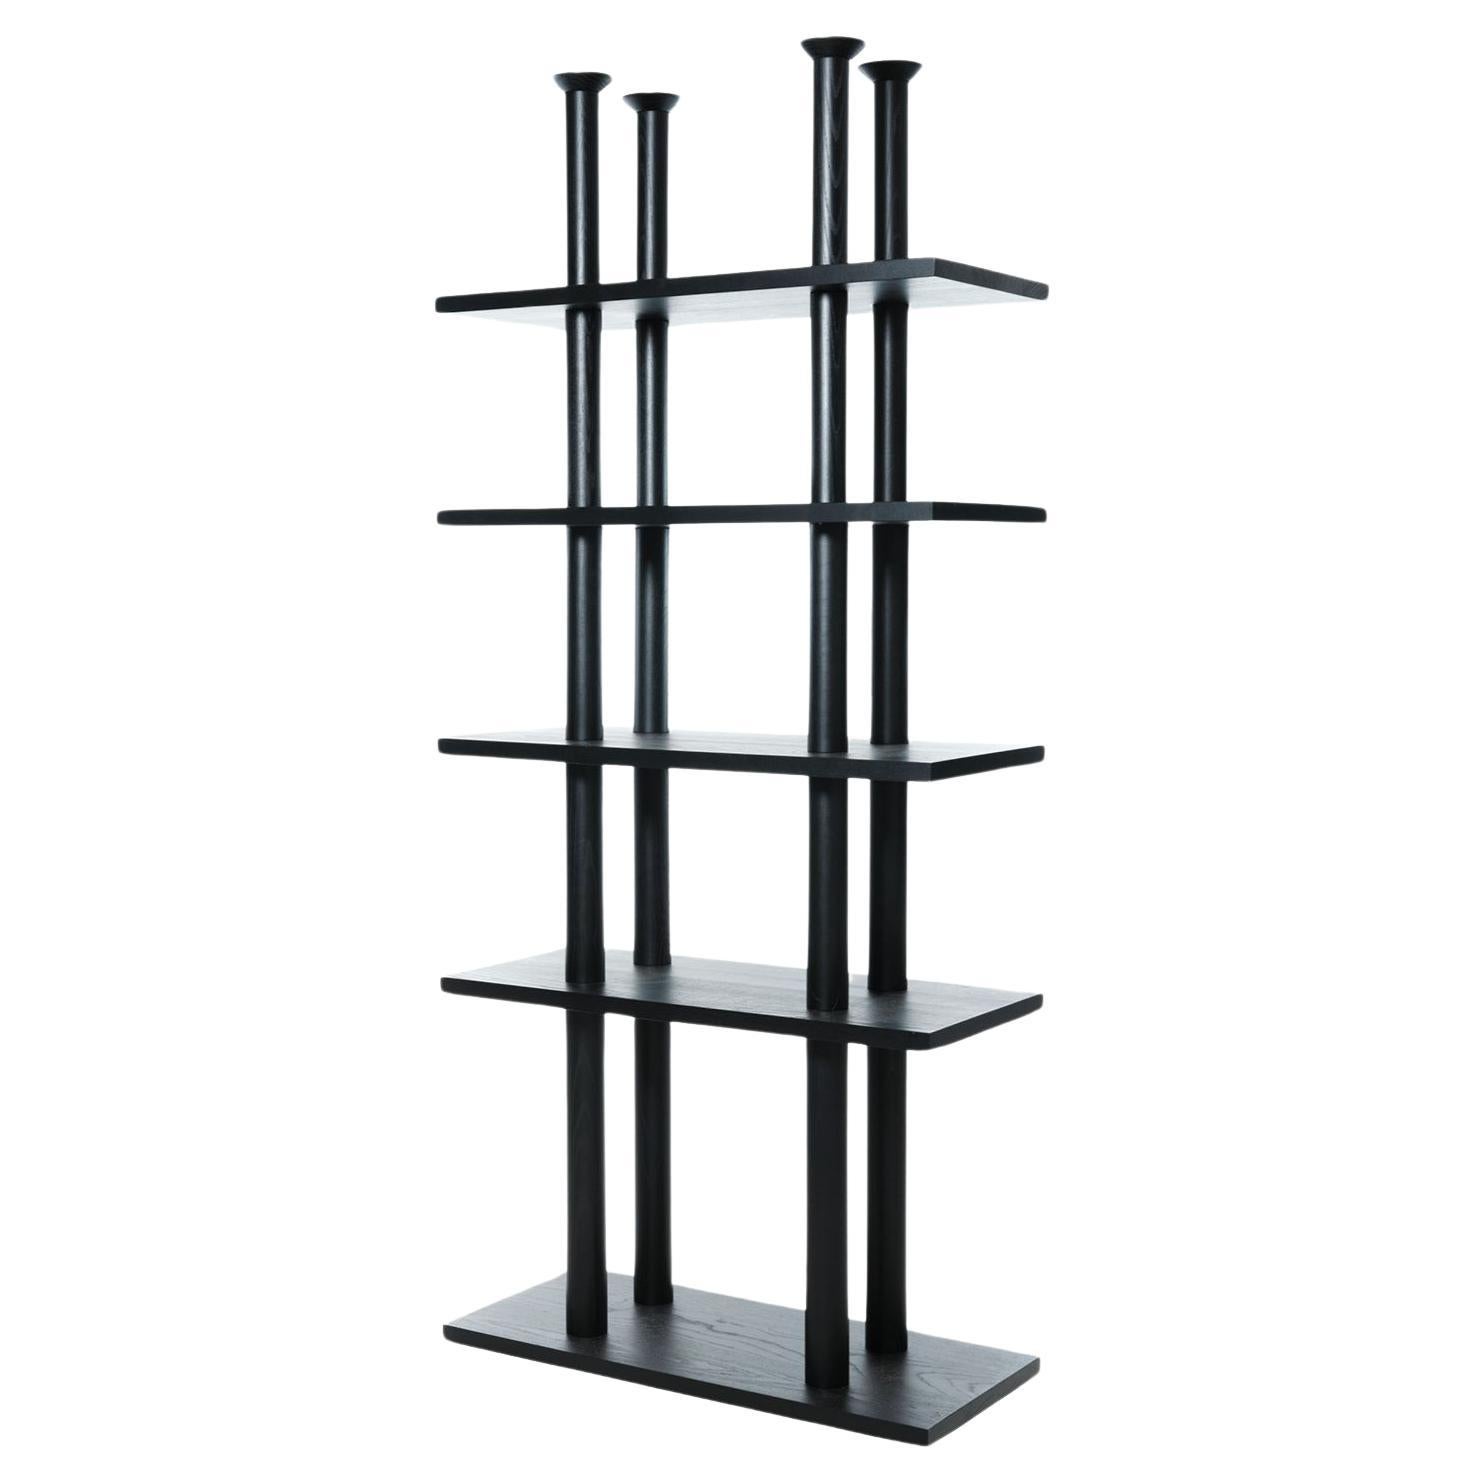 Peristylo Black Wood Shelve by Oscar Tusquets for Bd Barcelona